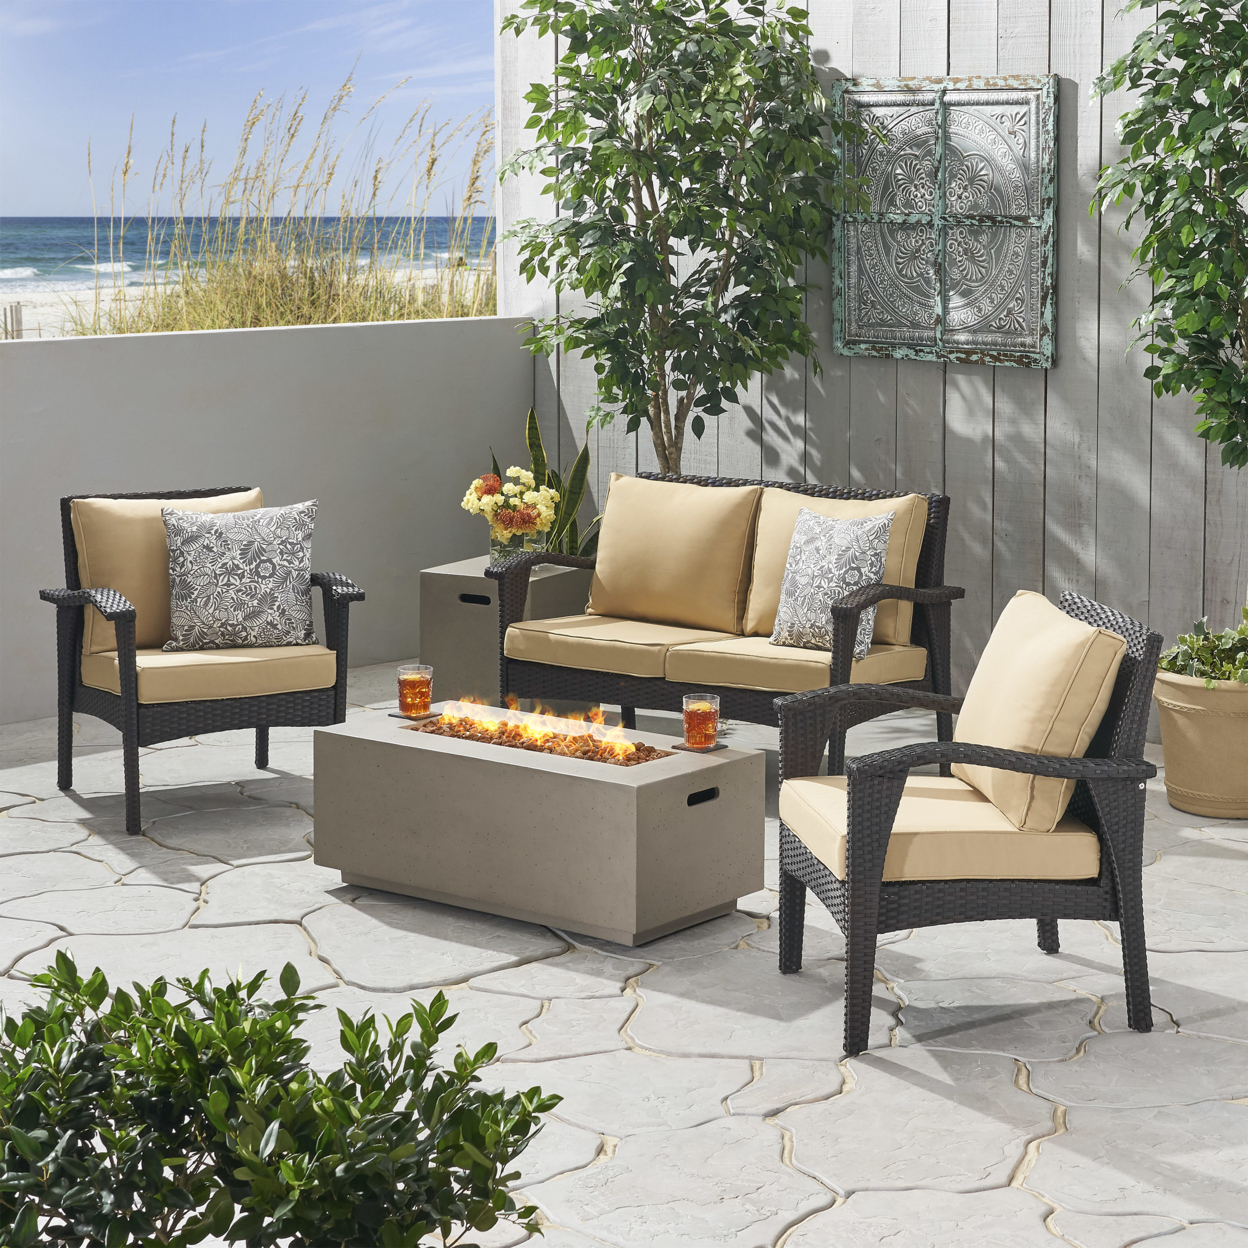 Deborah Outdoor 4 Seater Wicker Chat Set With Fire Pit - Brown + Tan + Light Gray